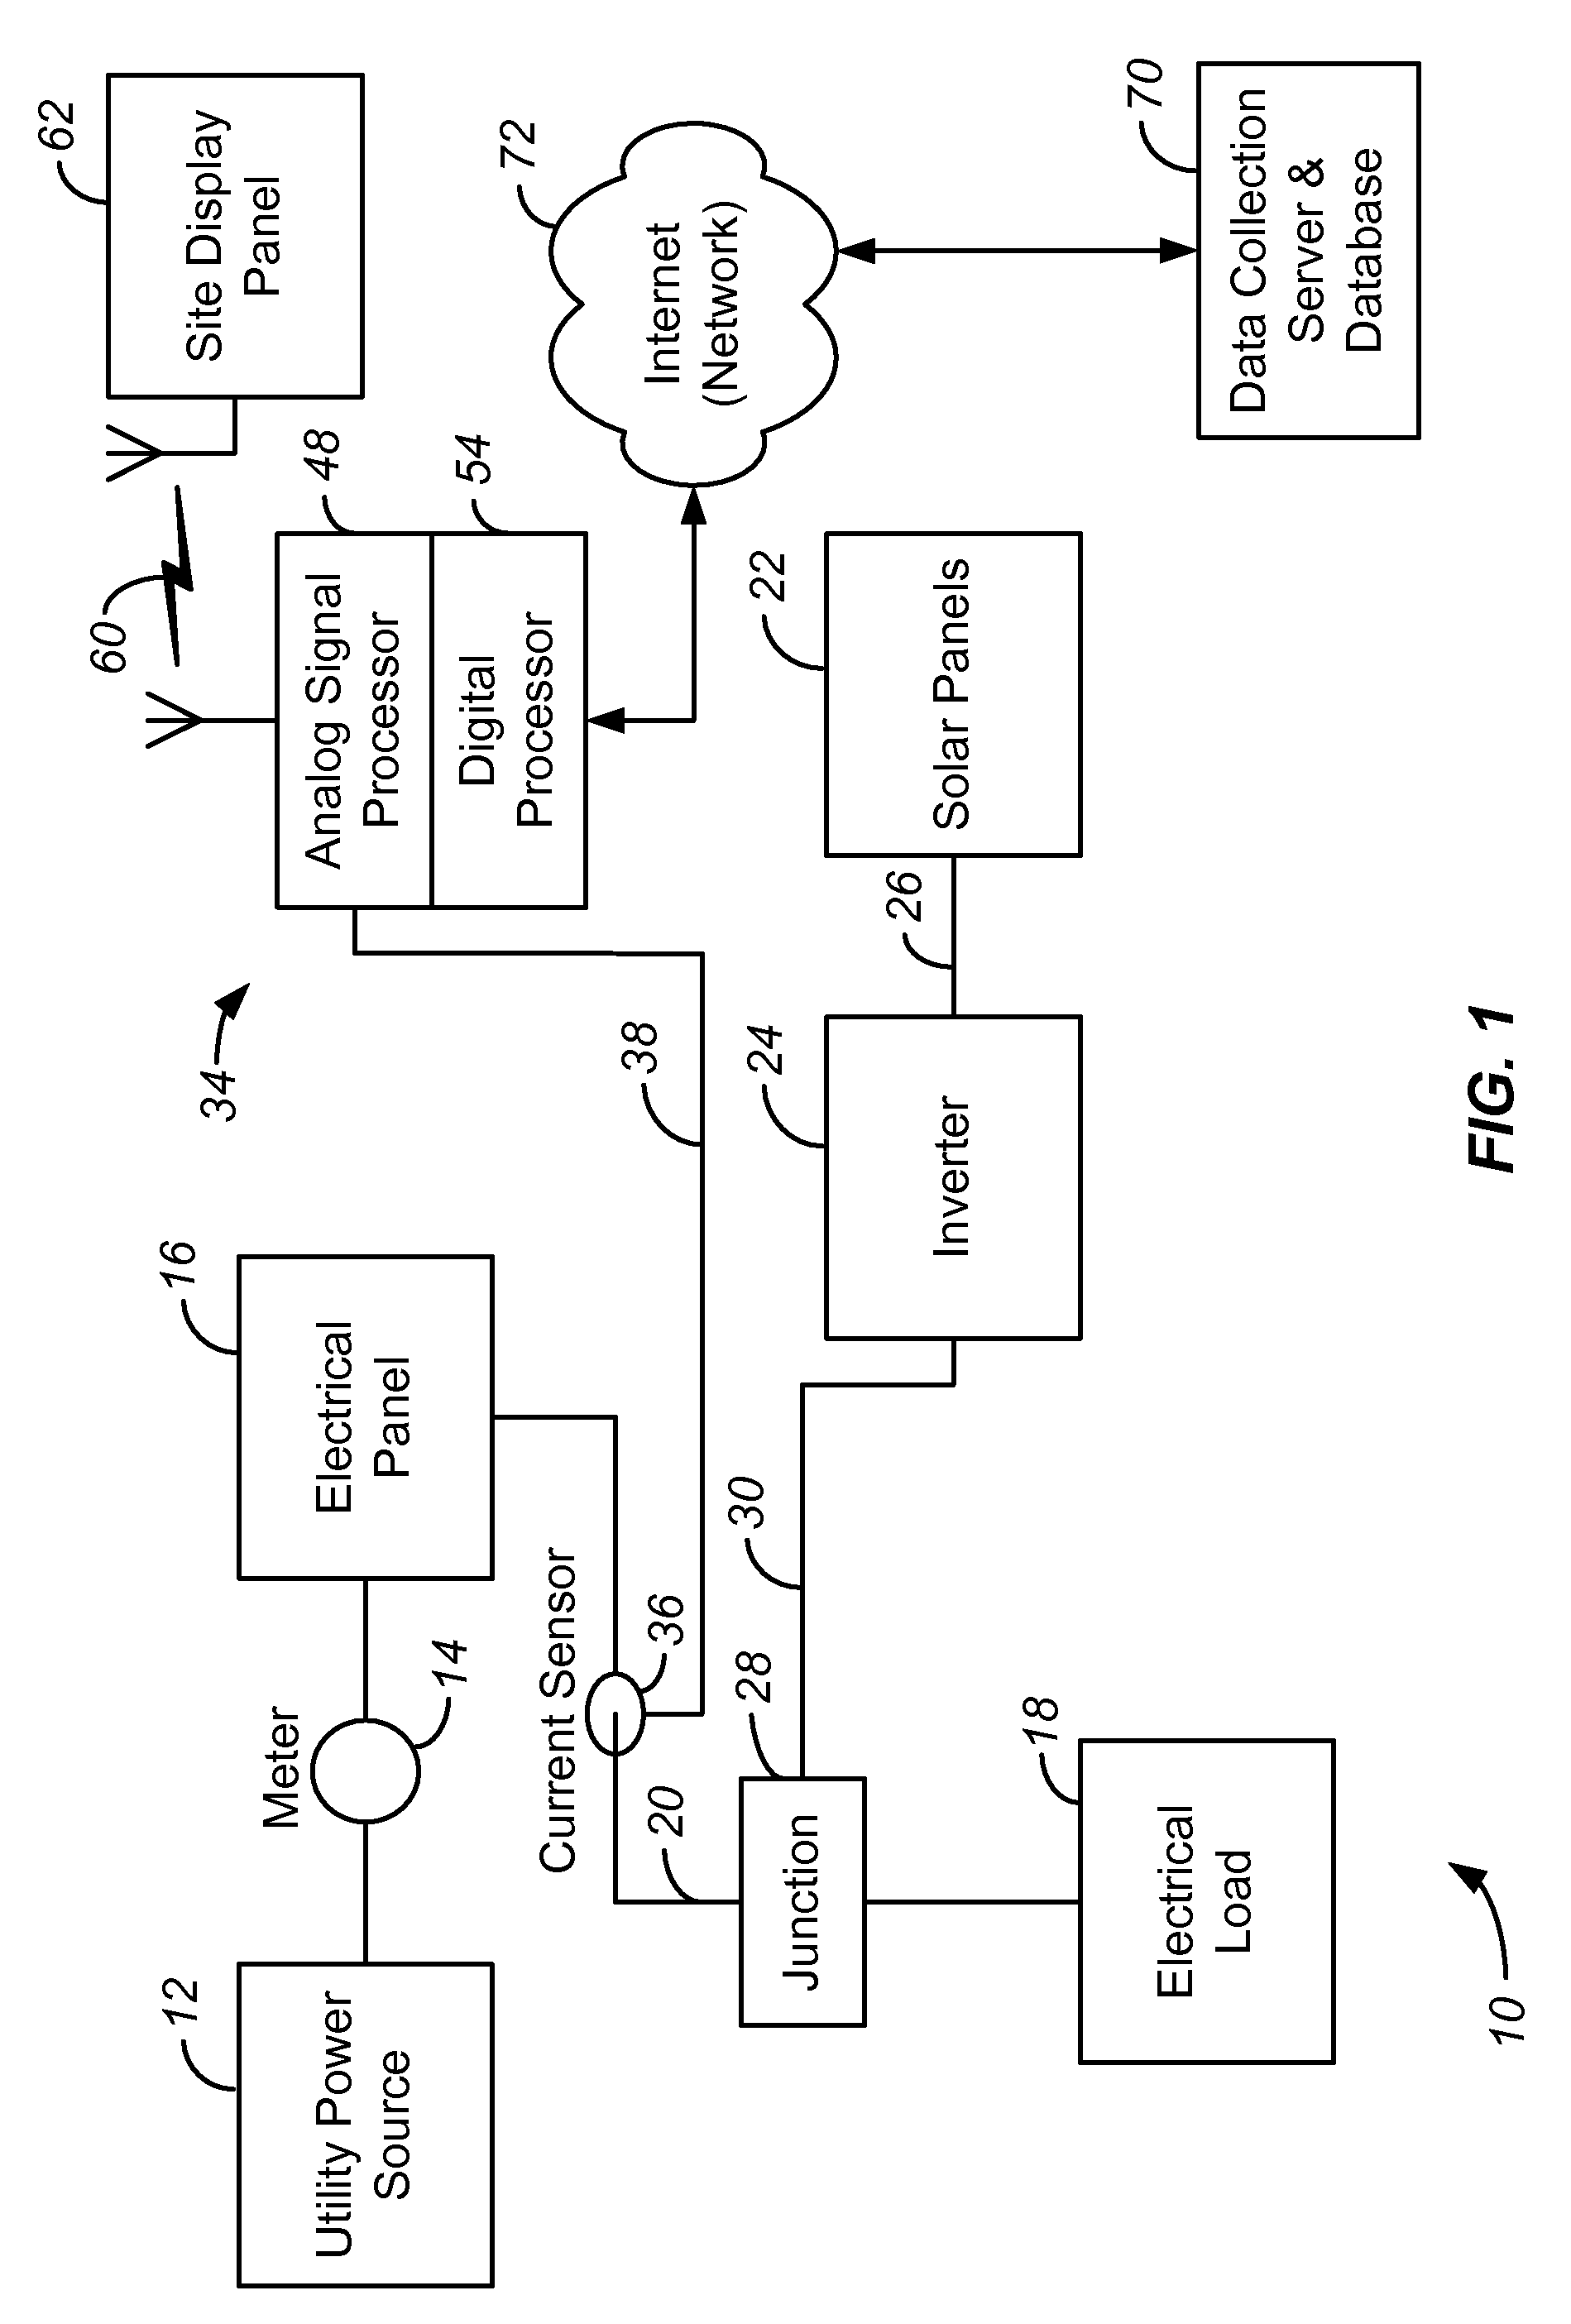 Method for enabling monitoring of power consumption